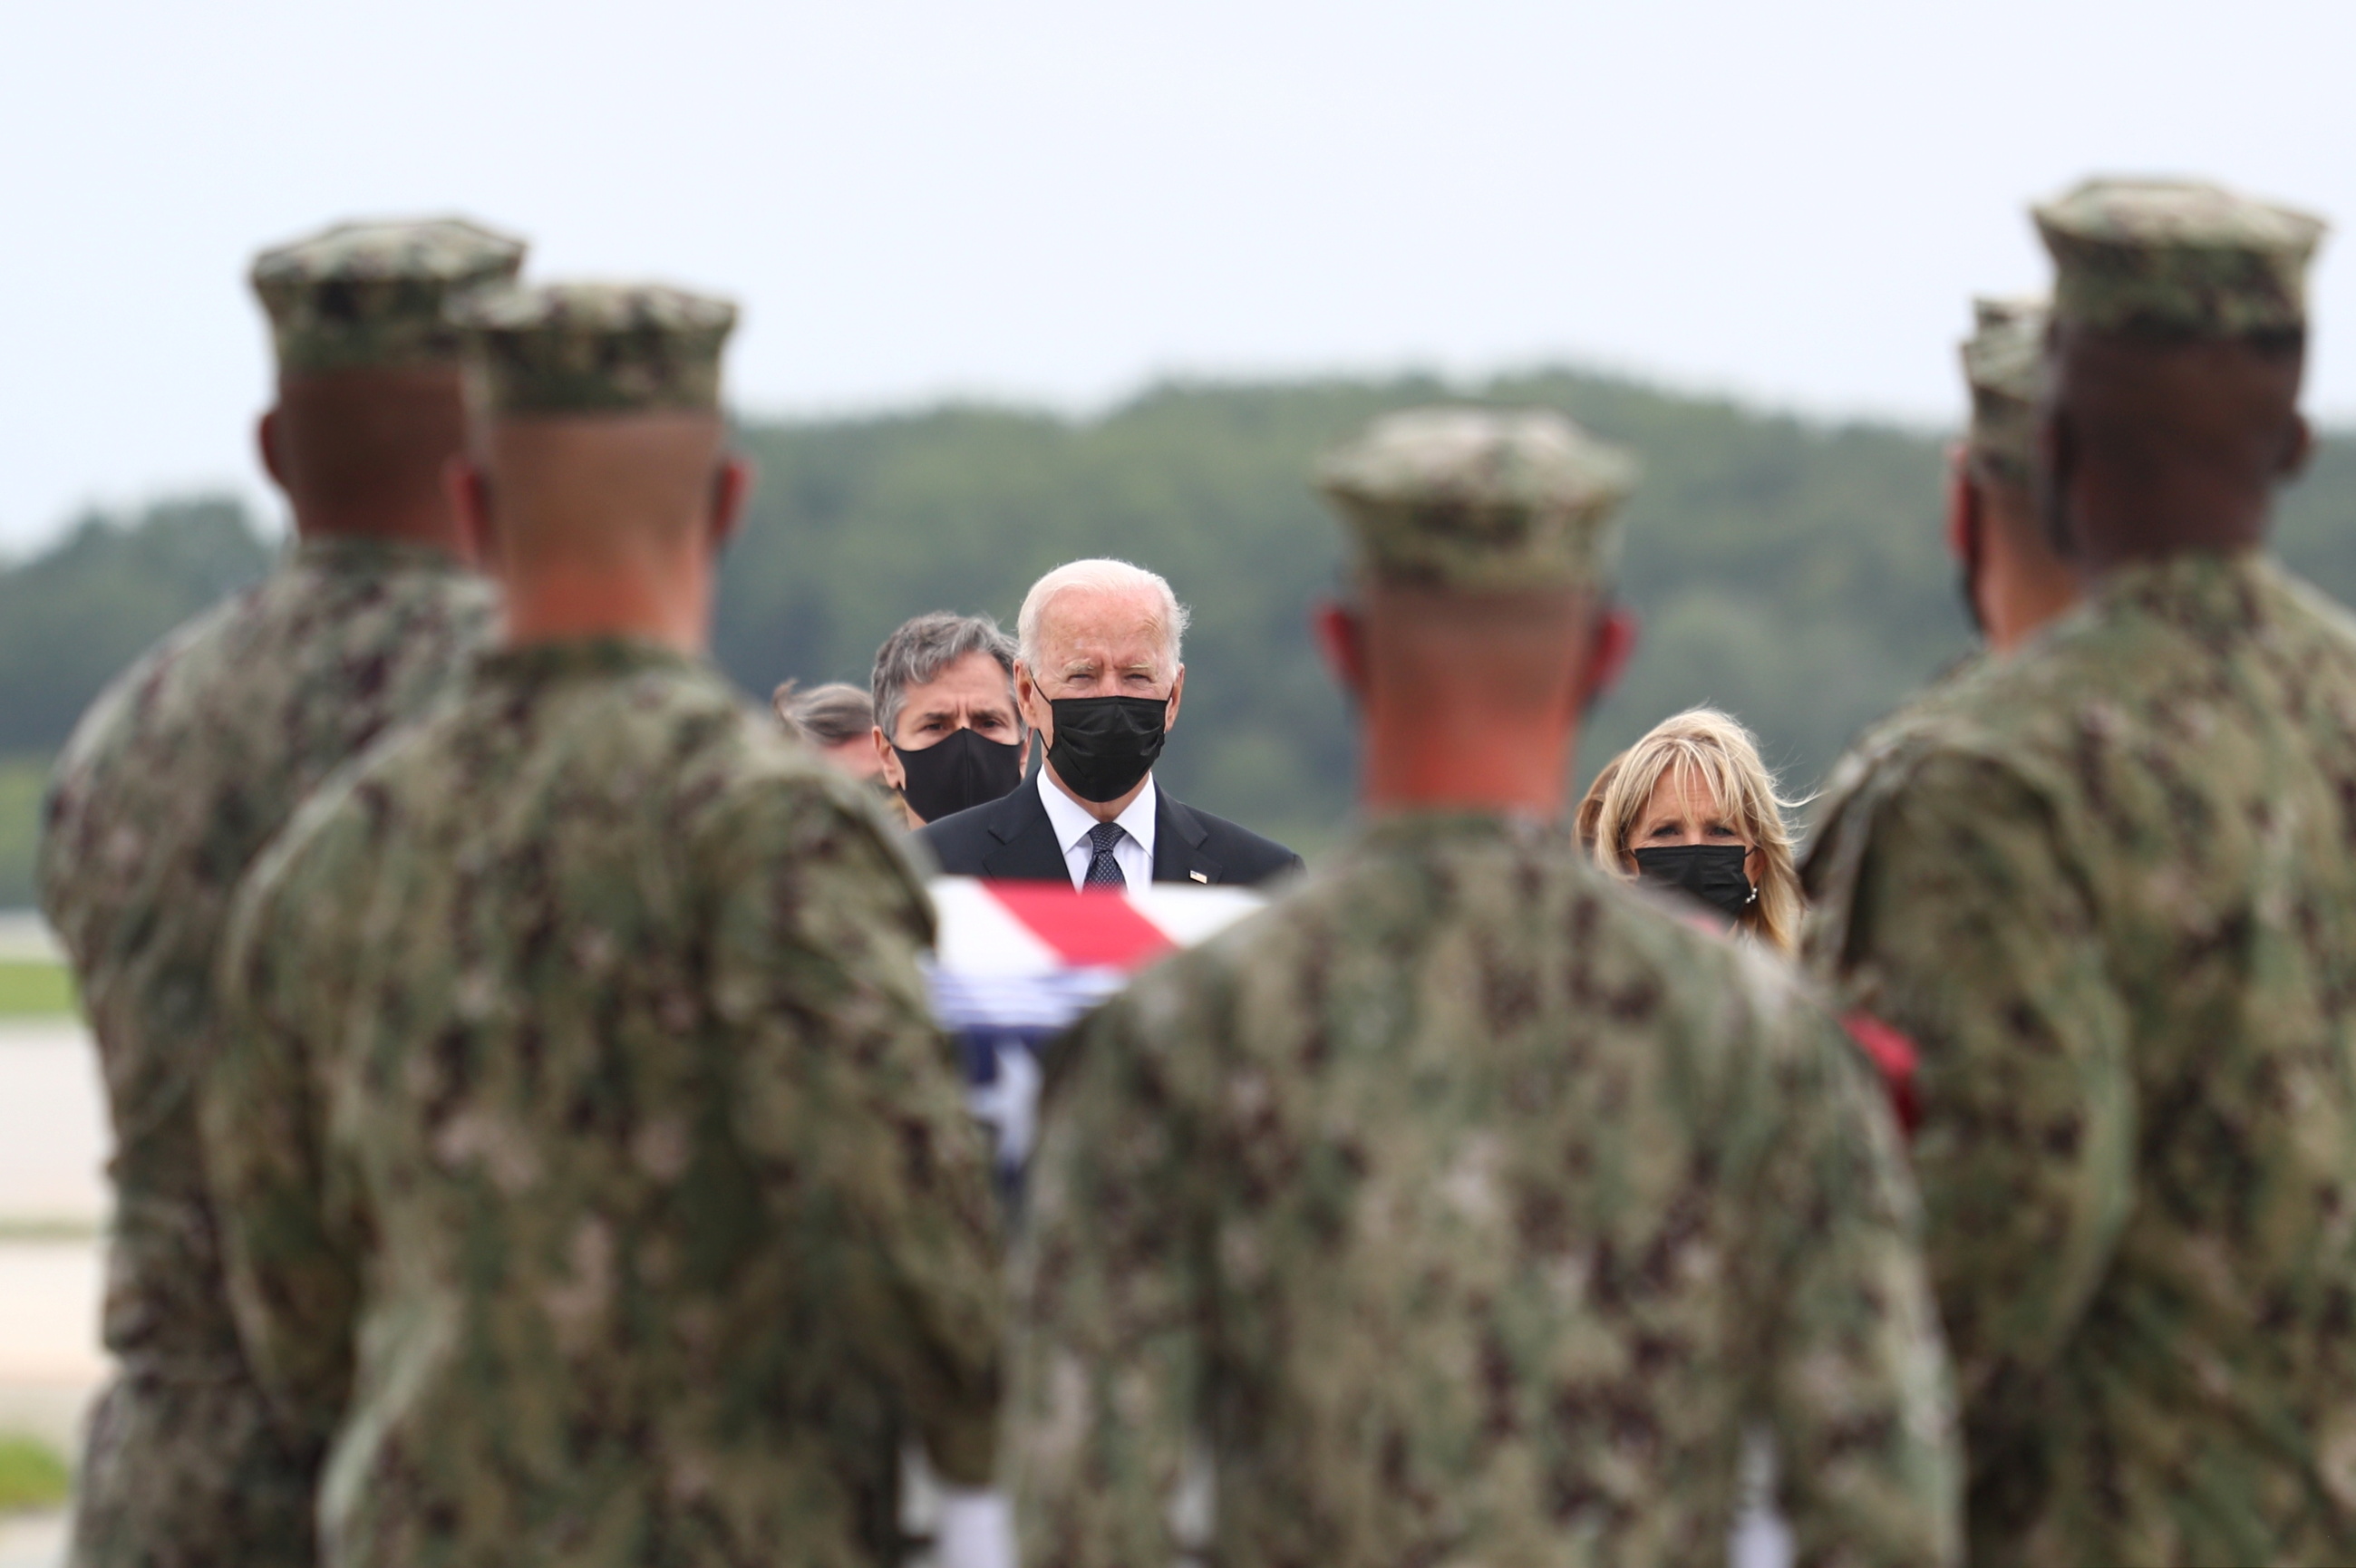 U.S. President Joe Biden attends the dignified transfer of the remains of U.S. Military service members who were killed by a suicide bombing at the Hamid Karzai International Airport